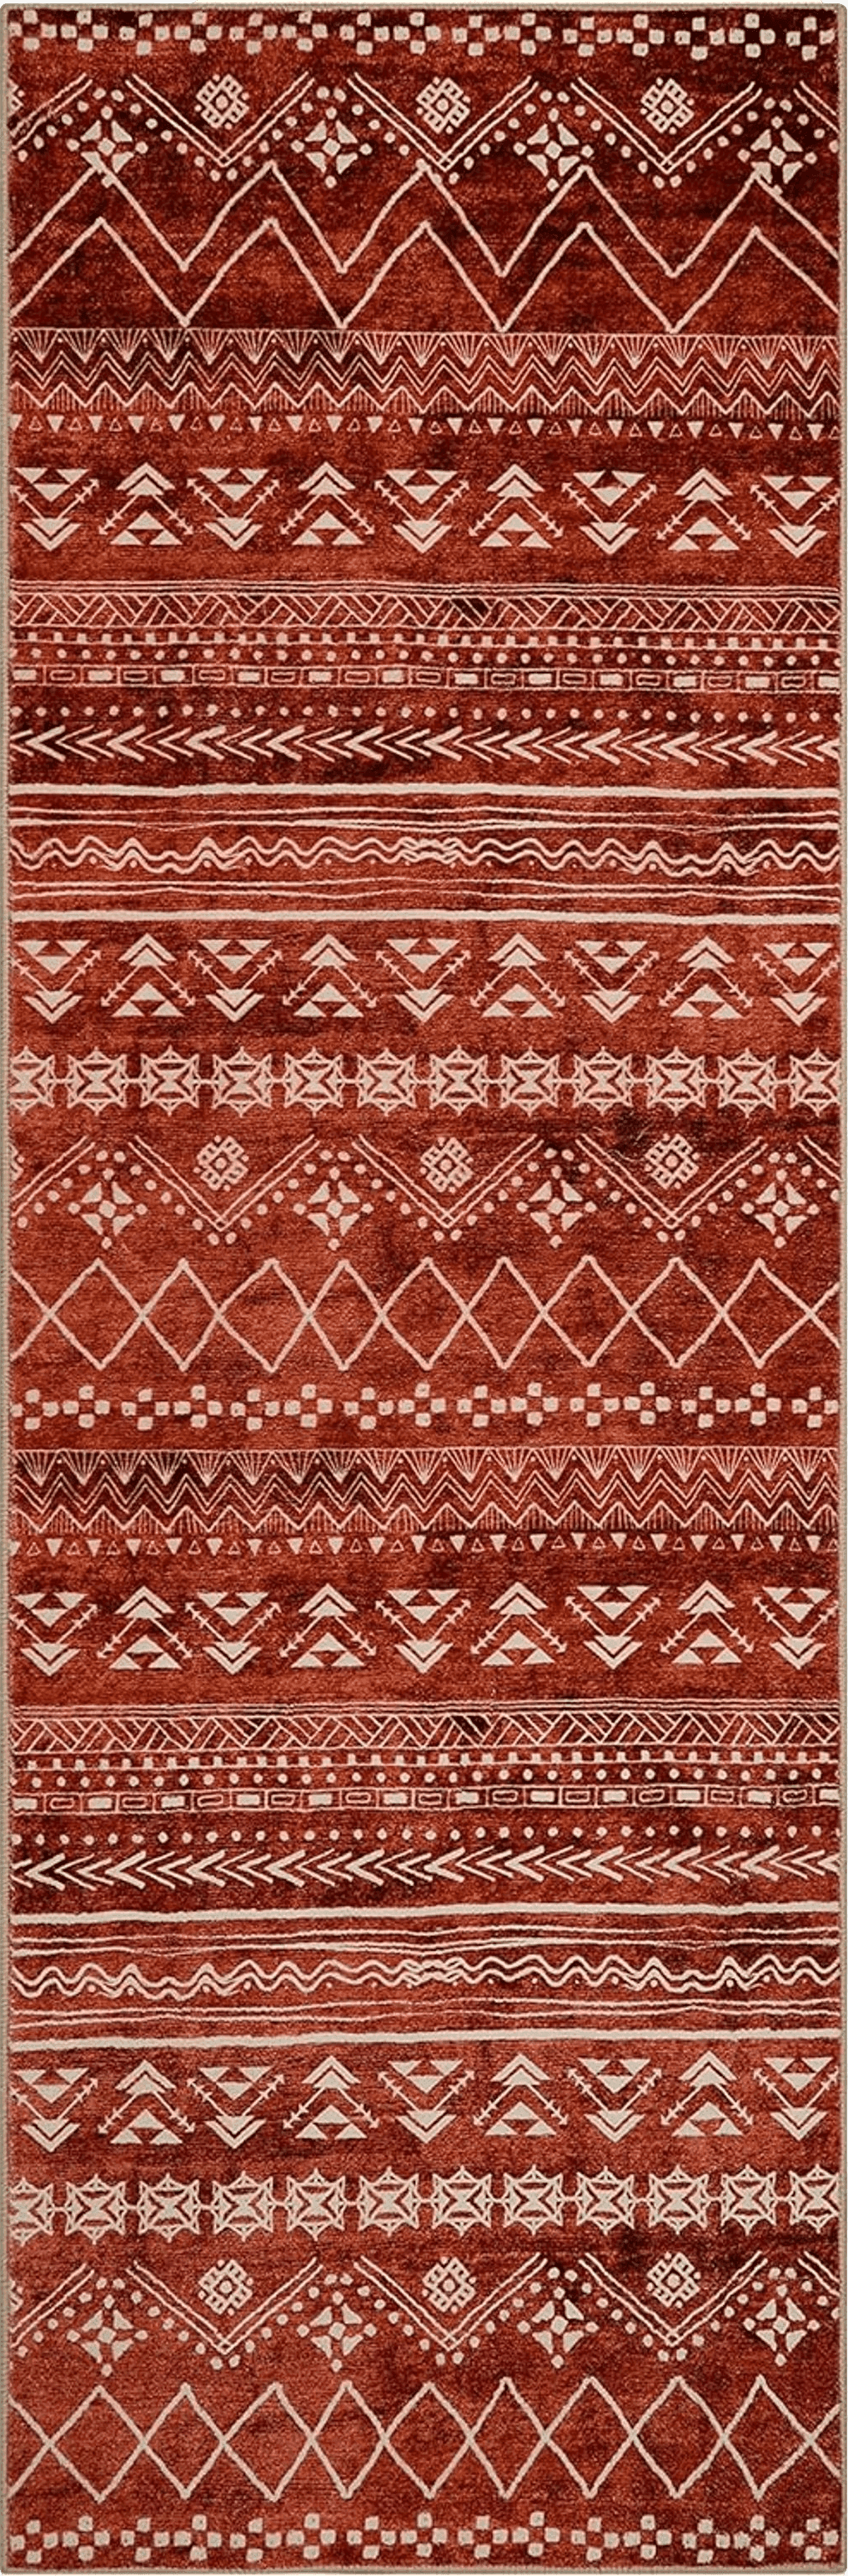 Bohemian Red Beeiva Washable Laundry Room Rugs, Bohemian Orange Rug Runners for Hallways 6 Feet Non Slip with Rubber Backing for Bedroom Kitchen, Geomatric Tribal Rugs for Bedroom Entryway Runner